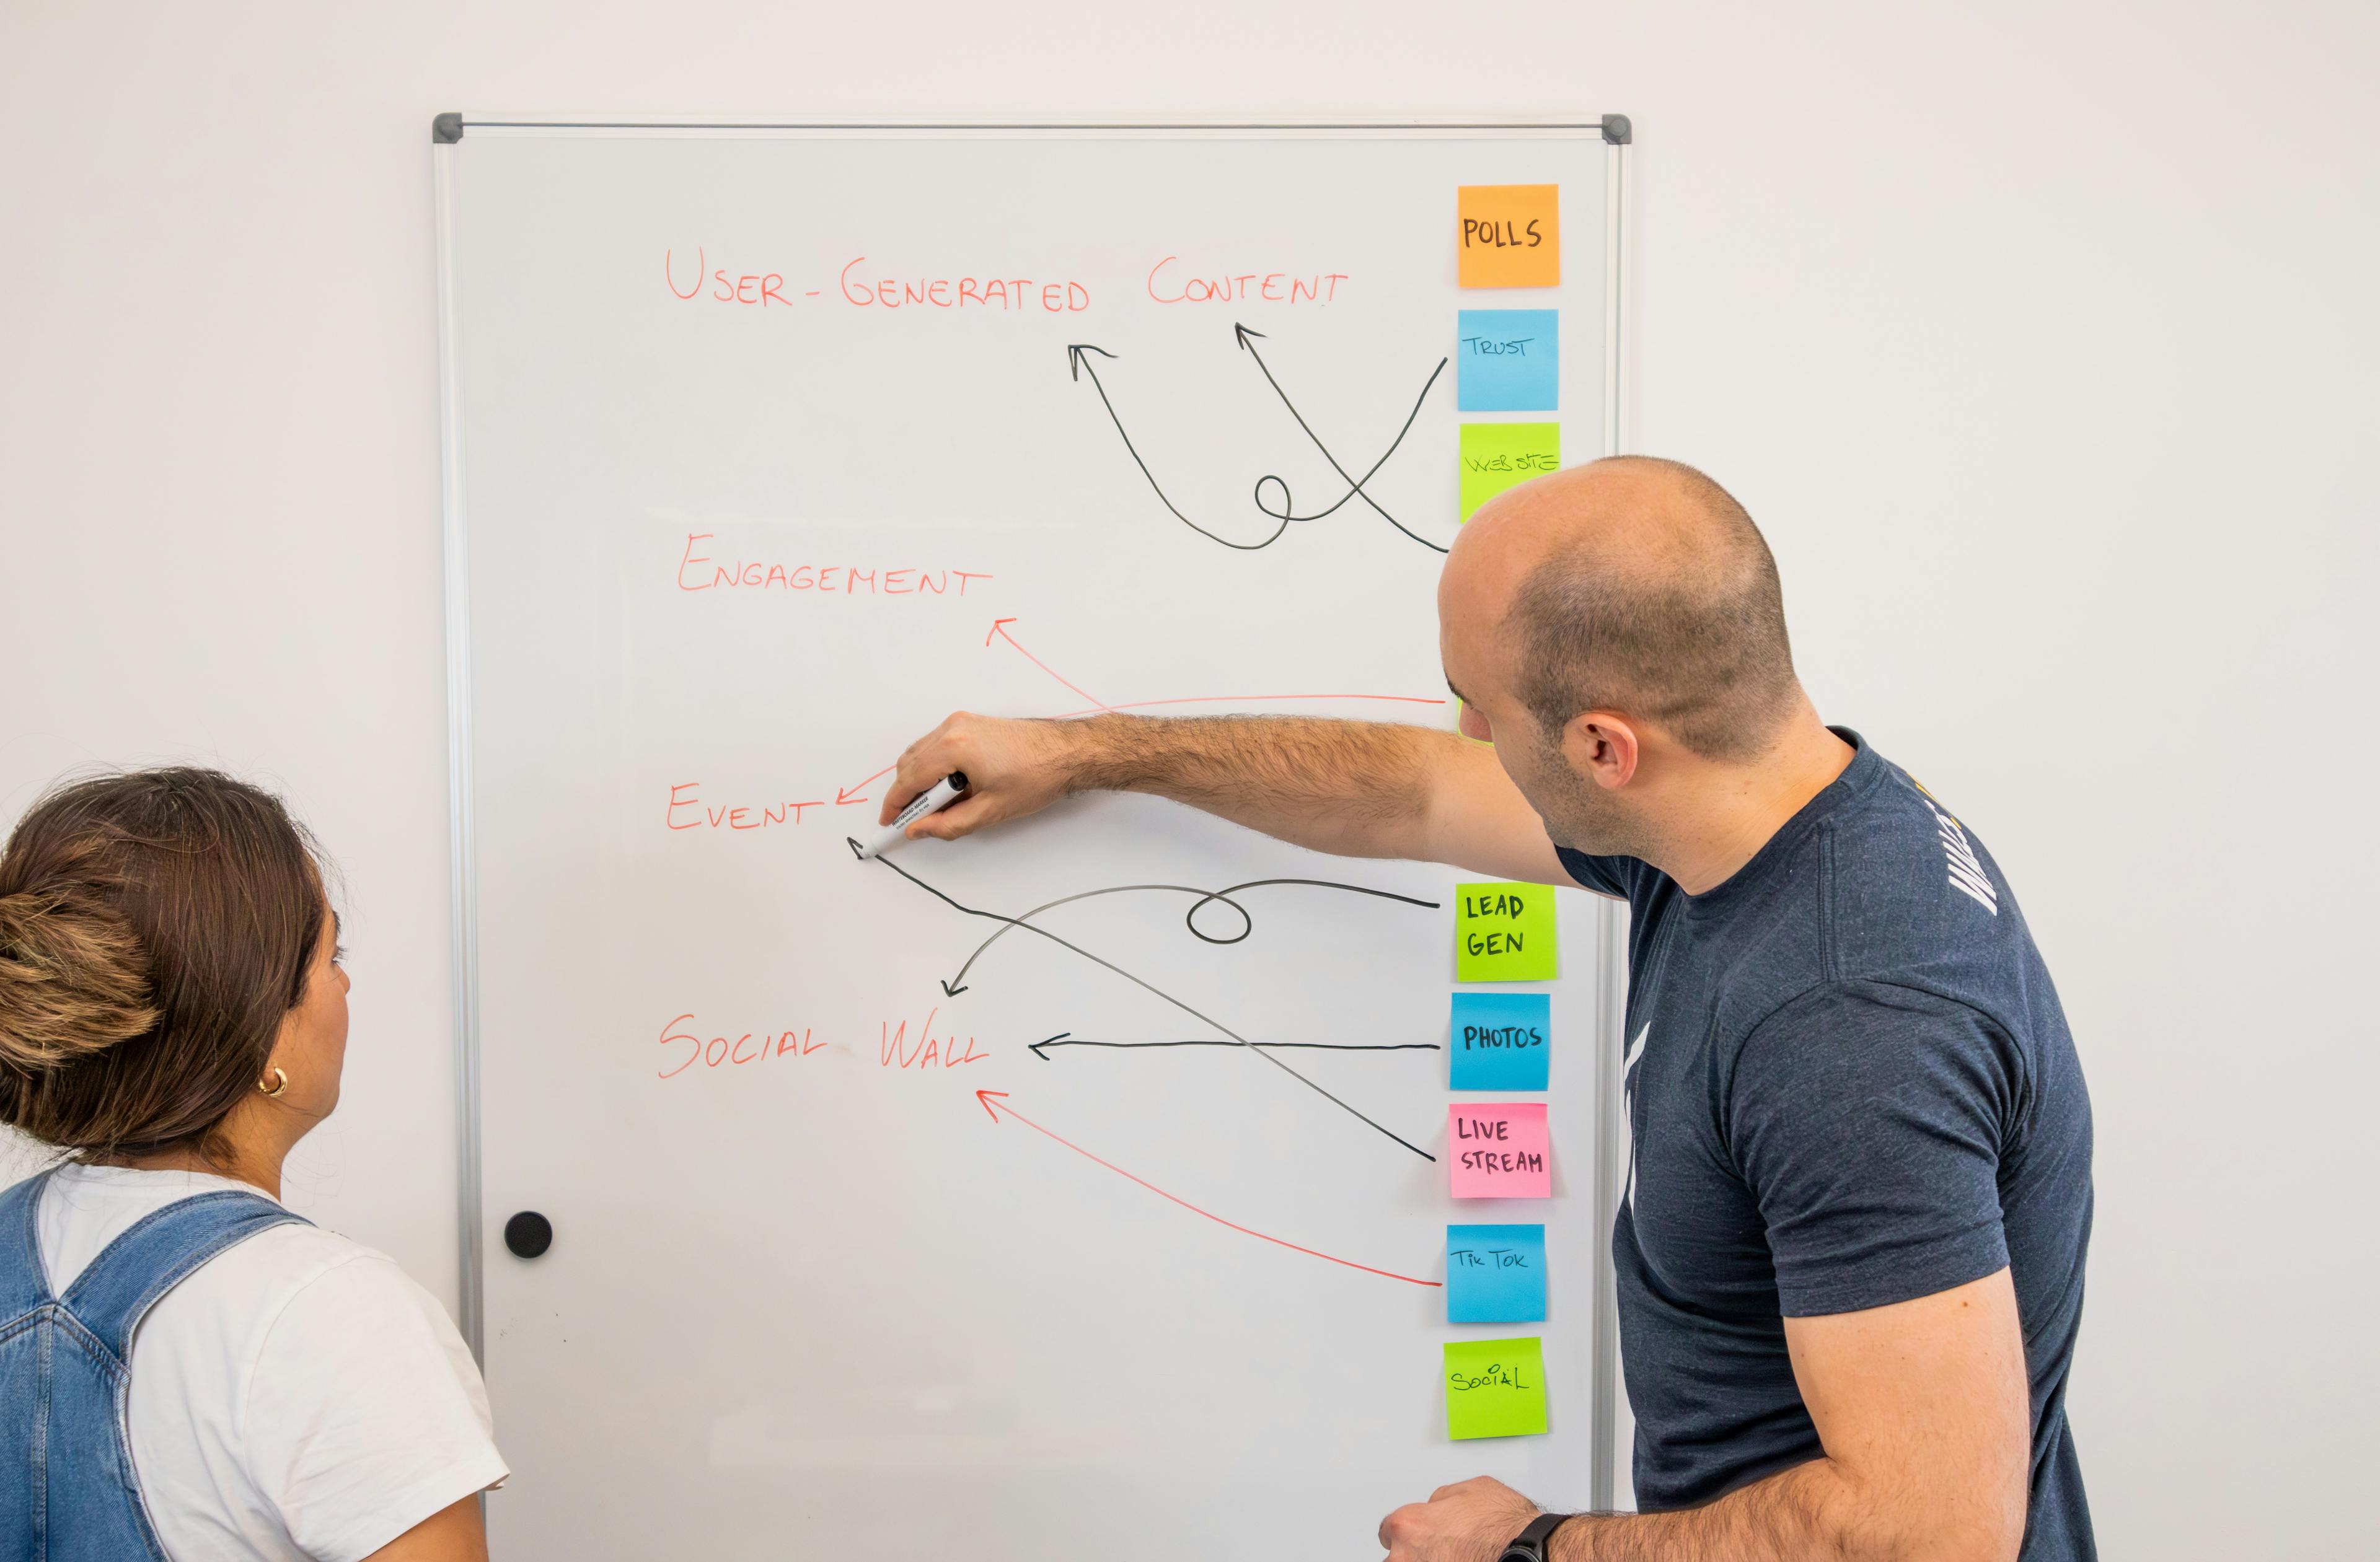 Man and woman working on a whiteboard to analyze the performance of user generated content in their marketing efforts